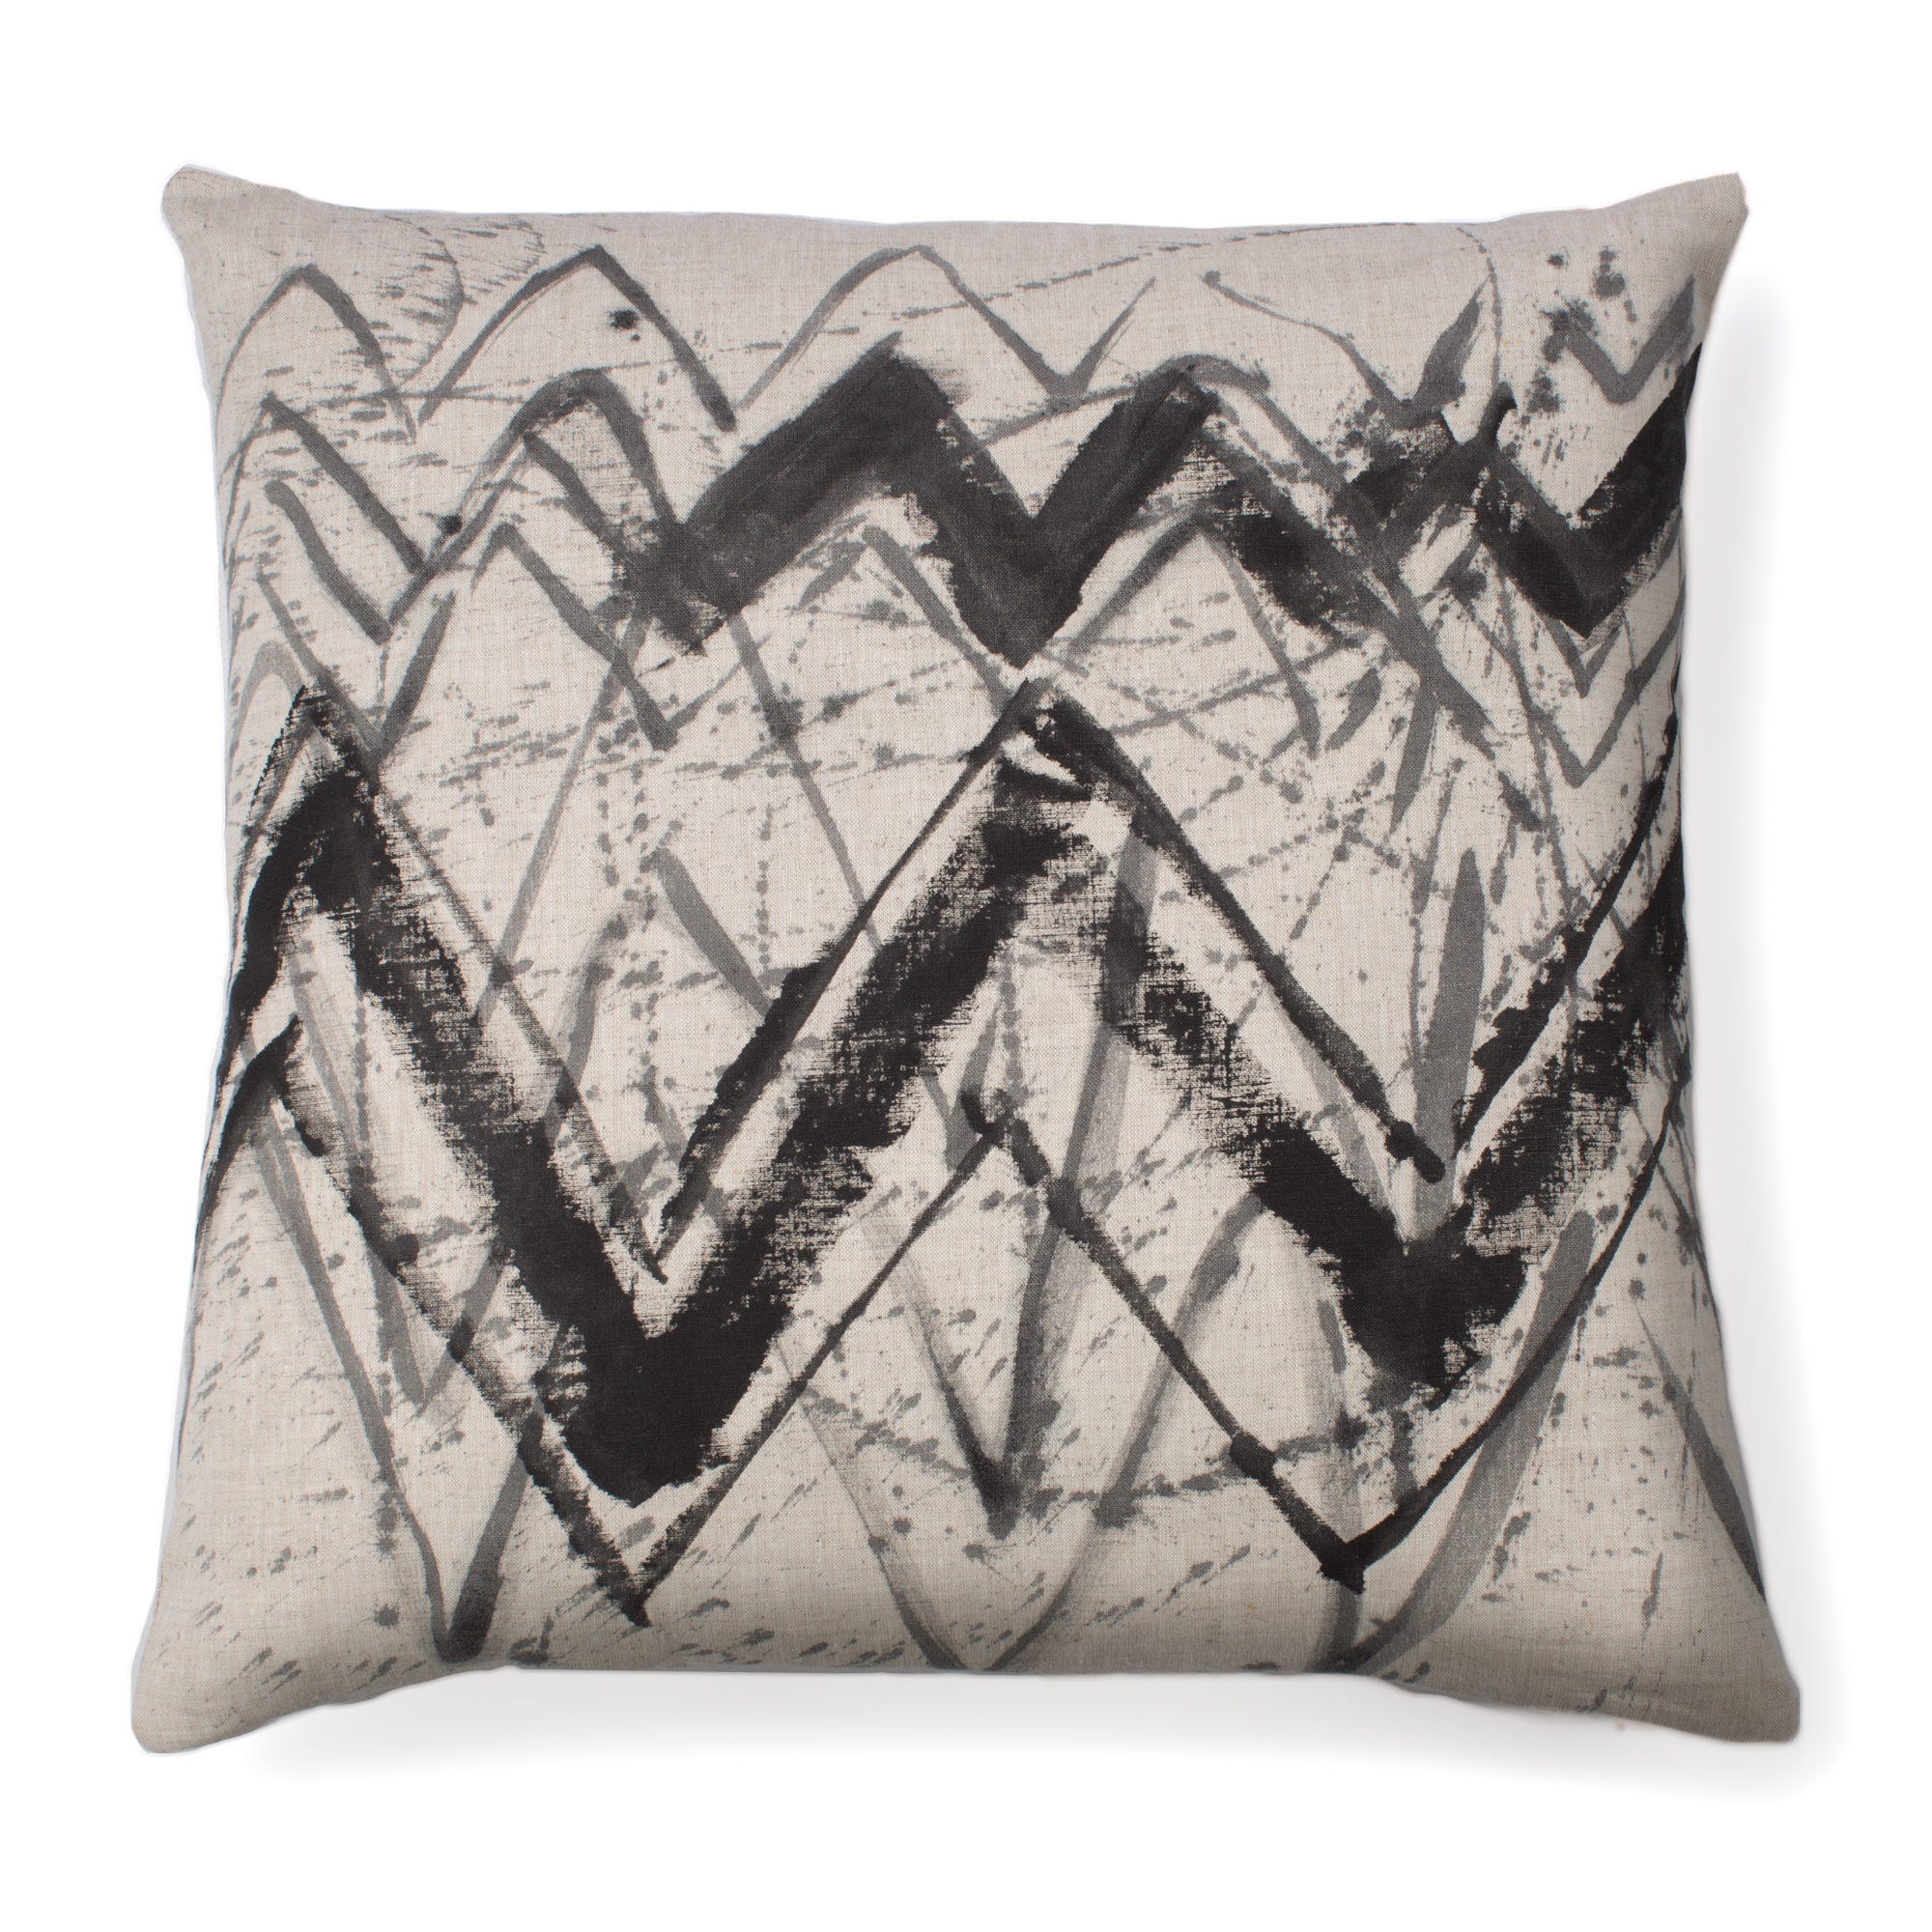 AbstractPillowFinished-5.jpg